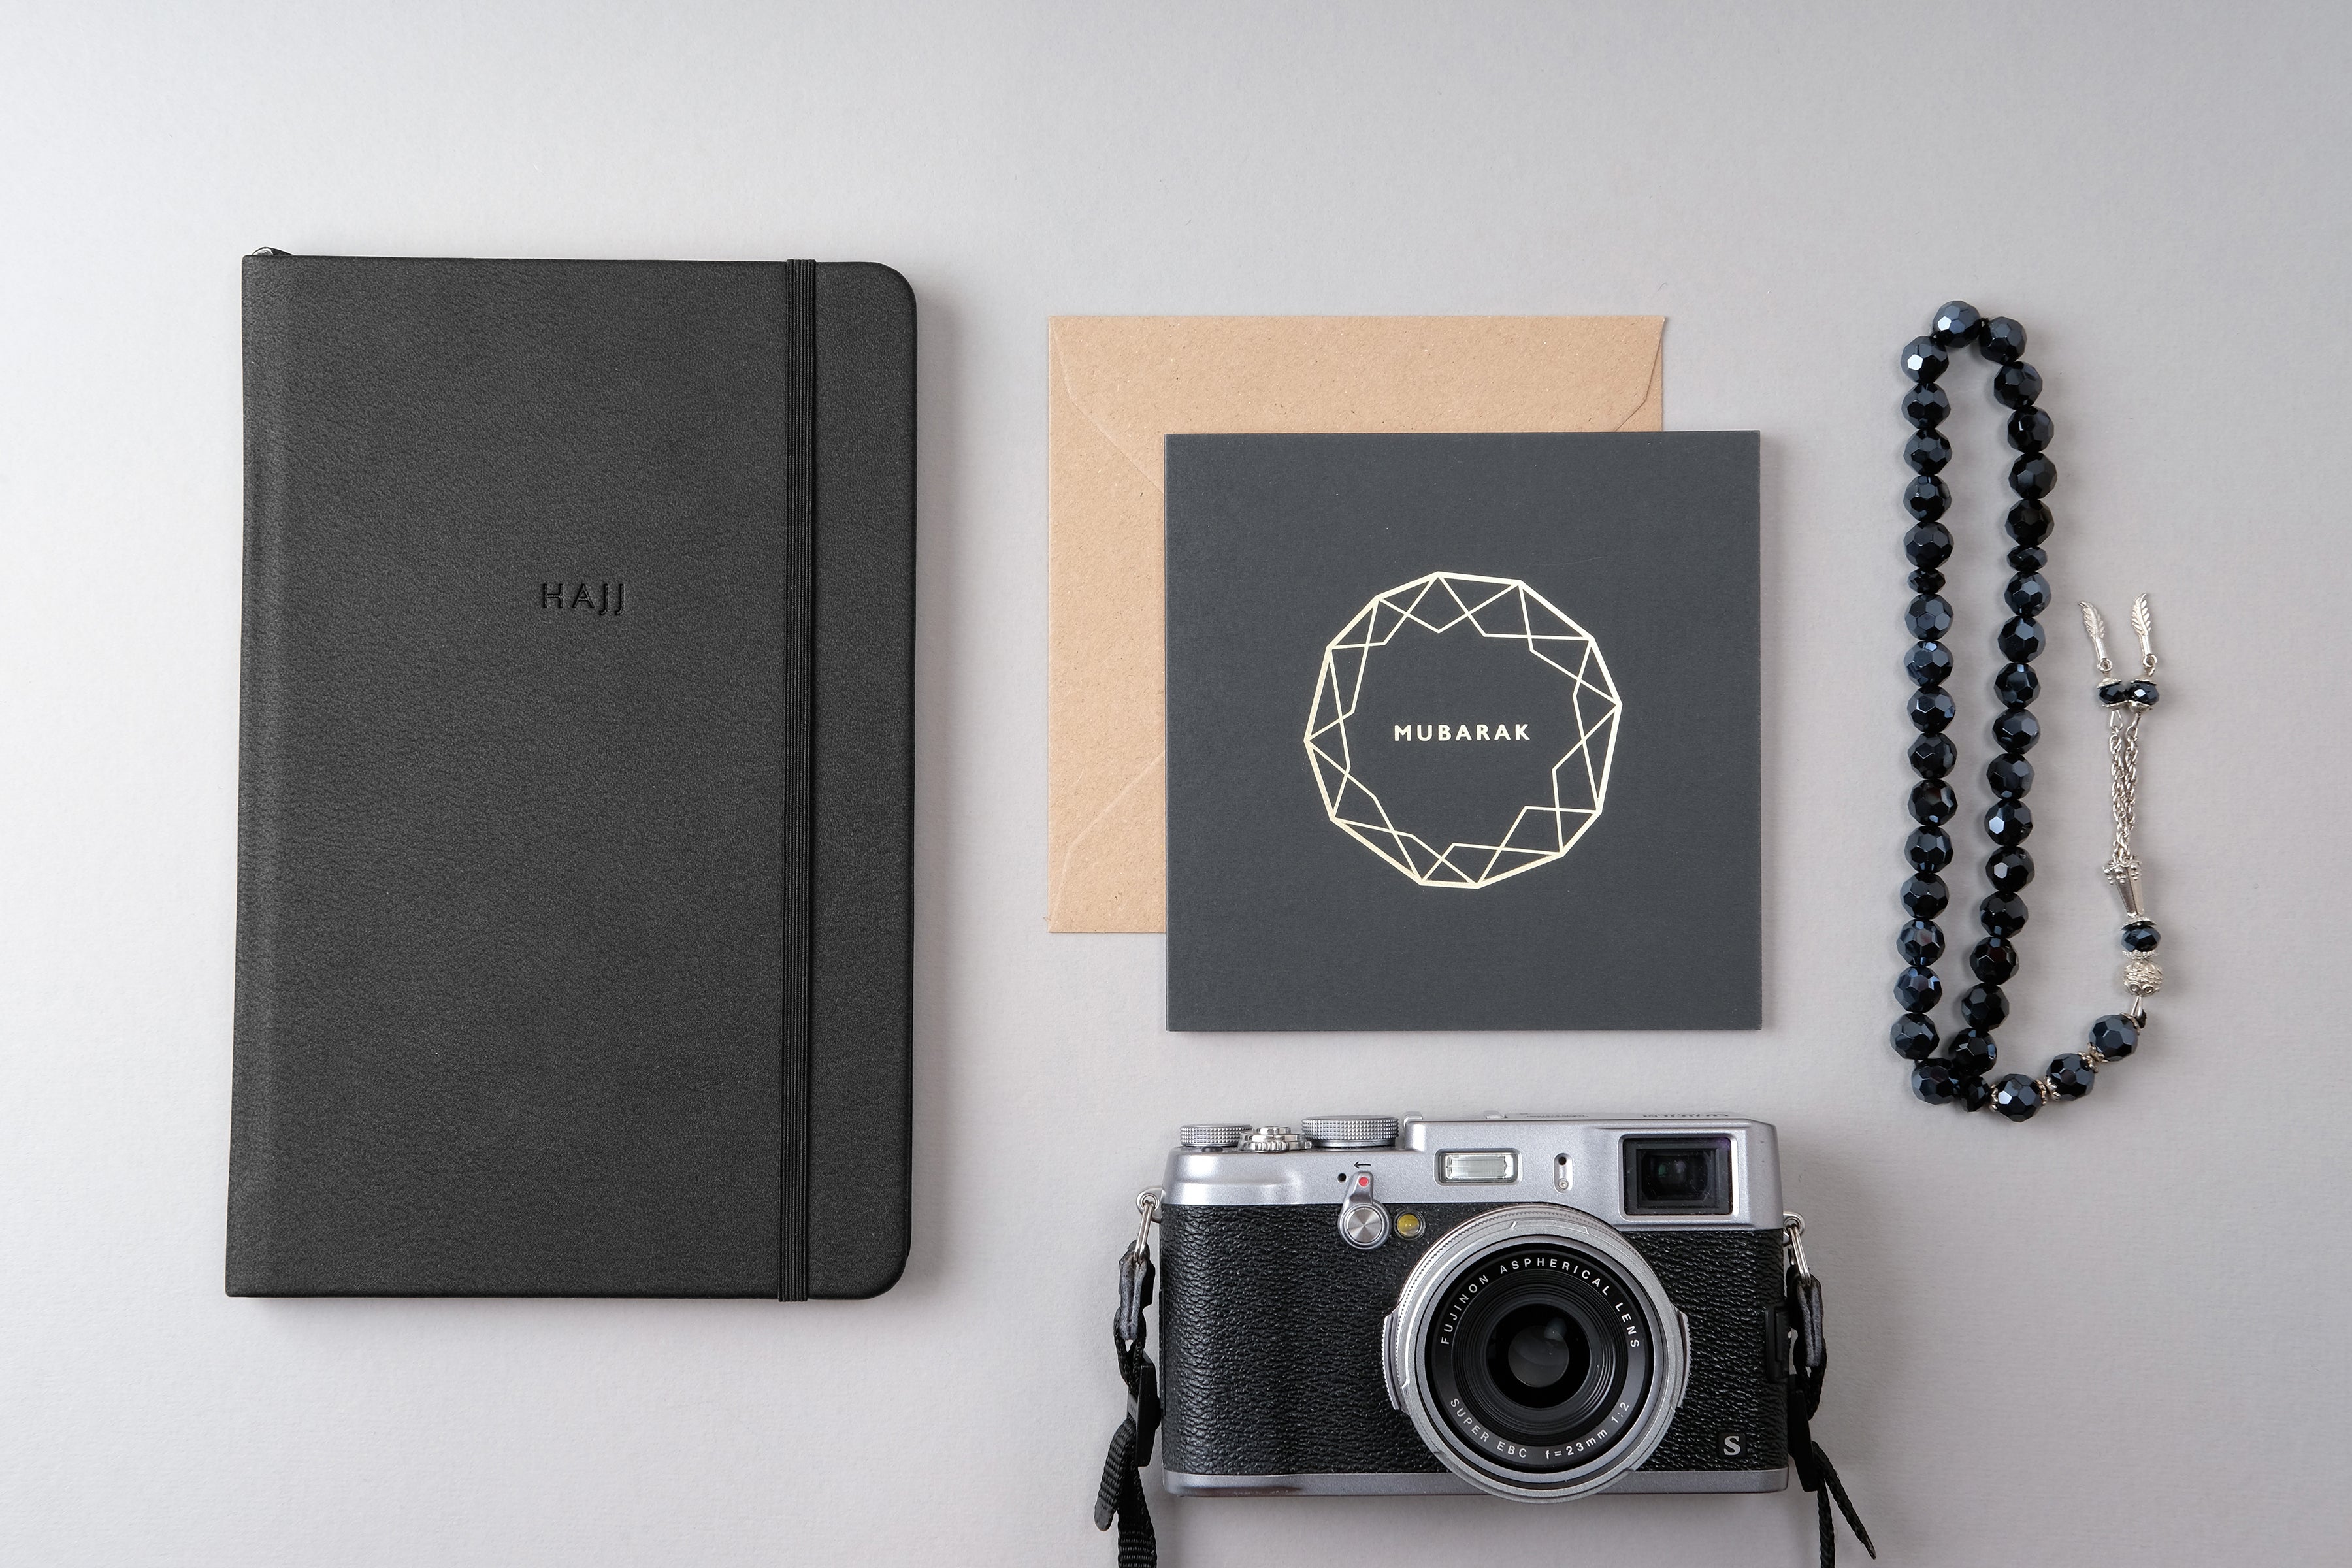 Hajj Planner and Journal - Recycled Leather